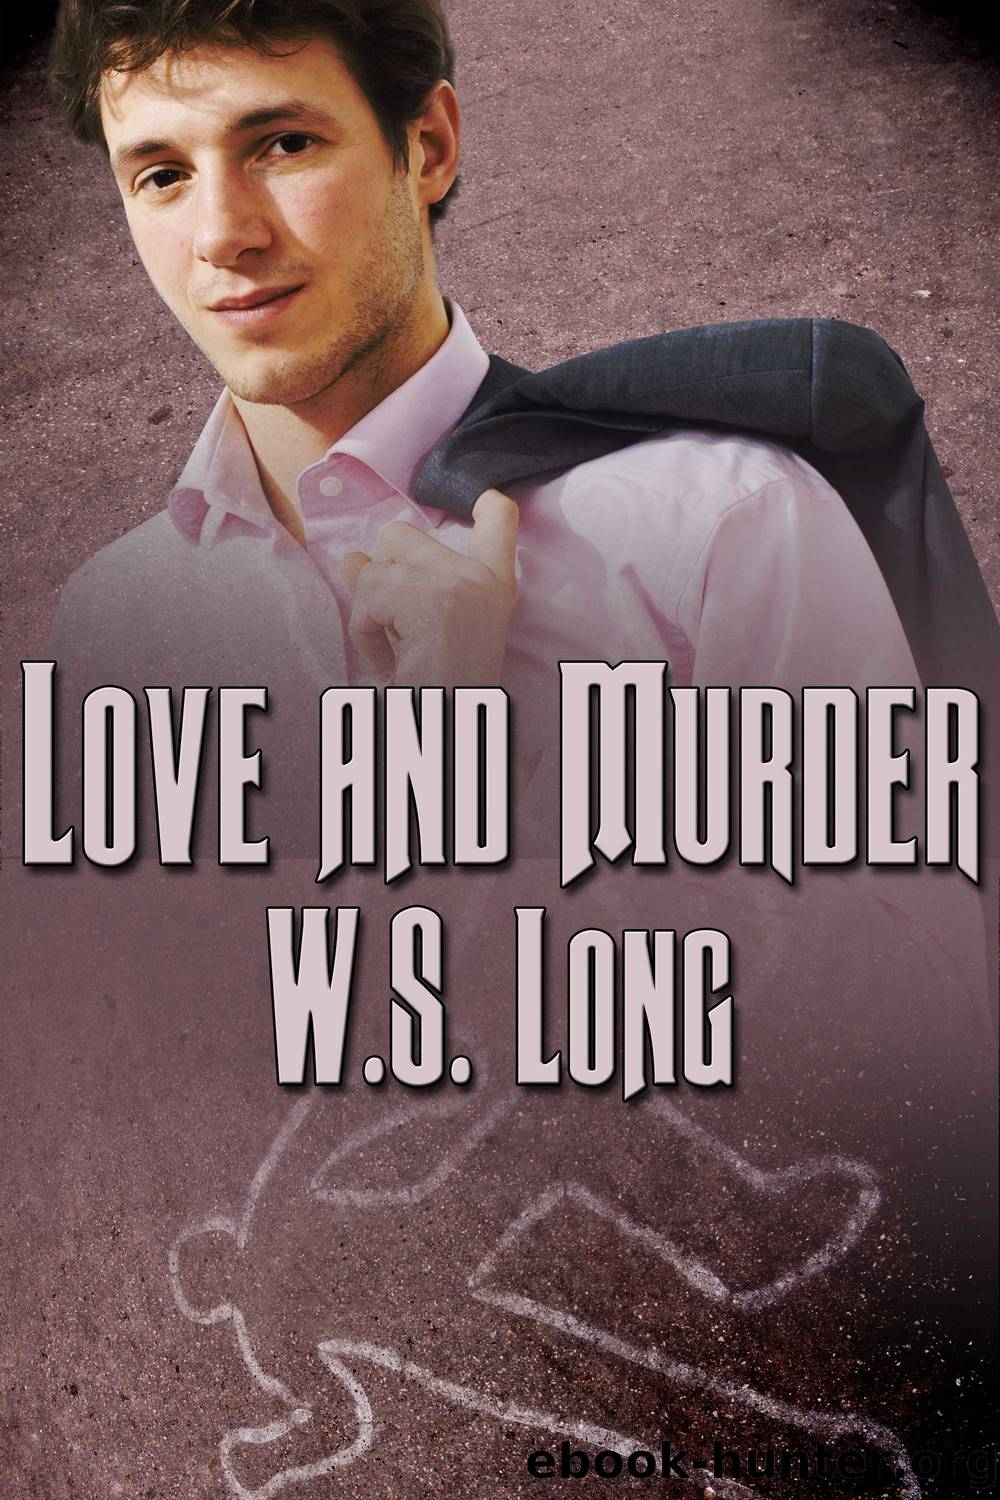 Love and Murder by W.S. Long